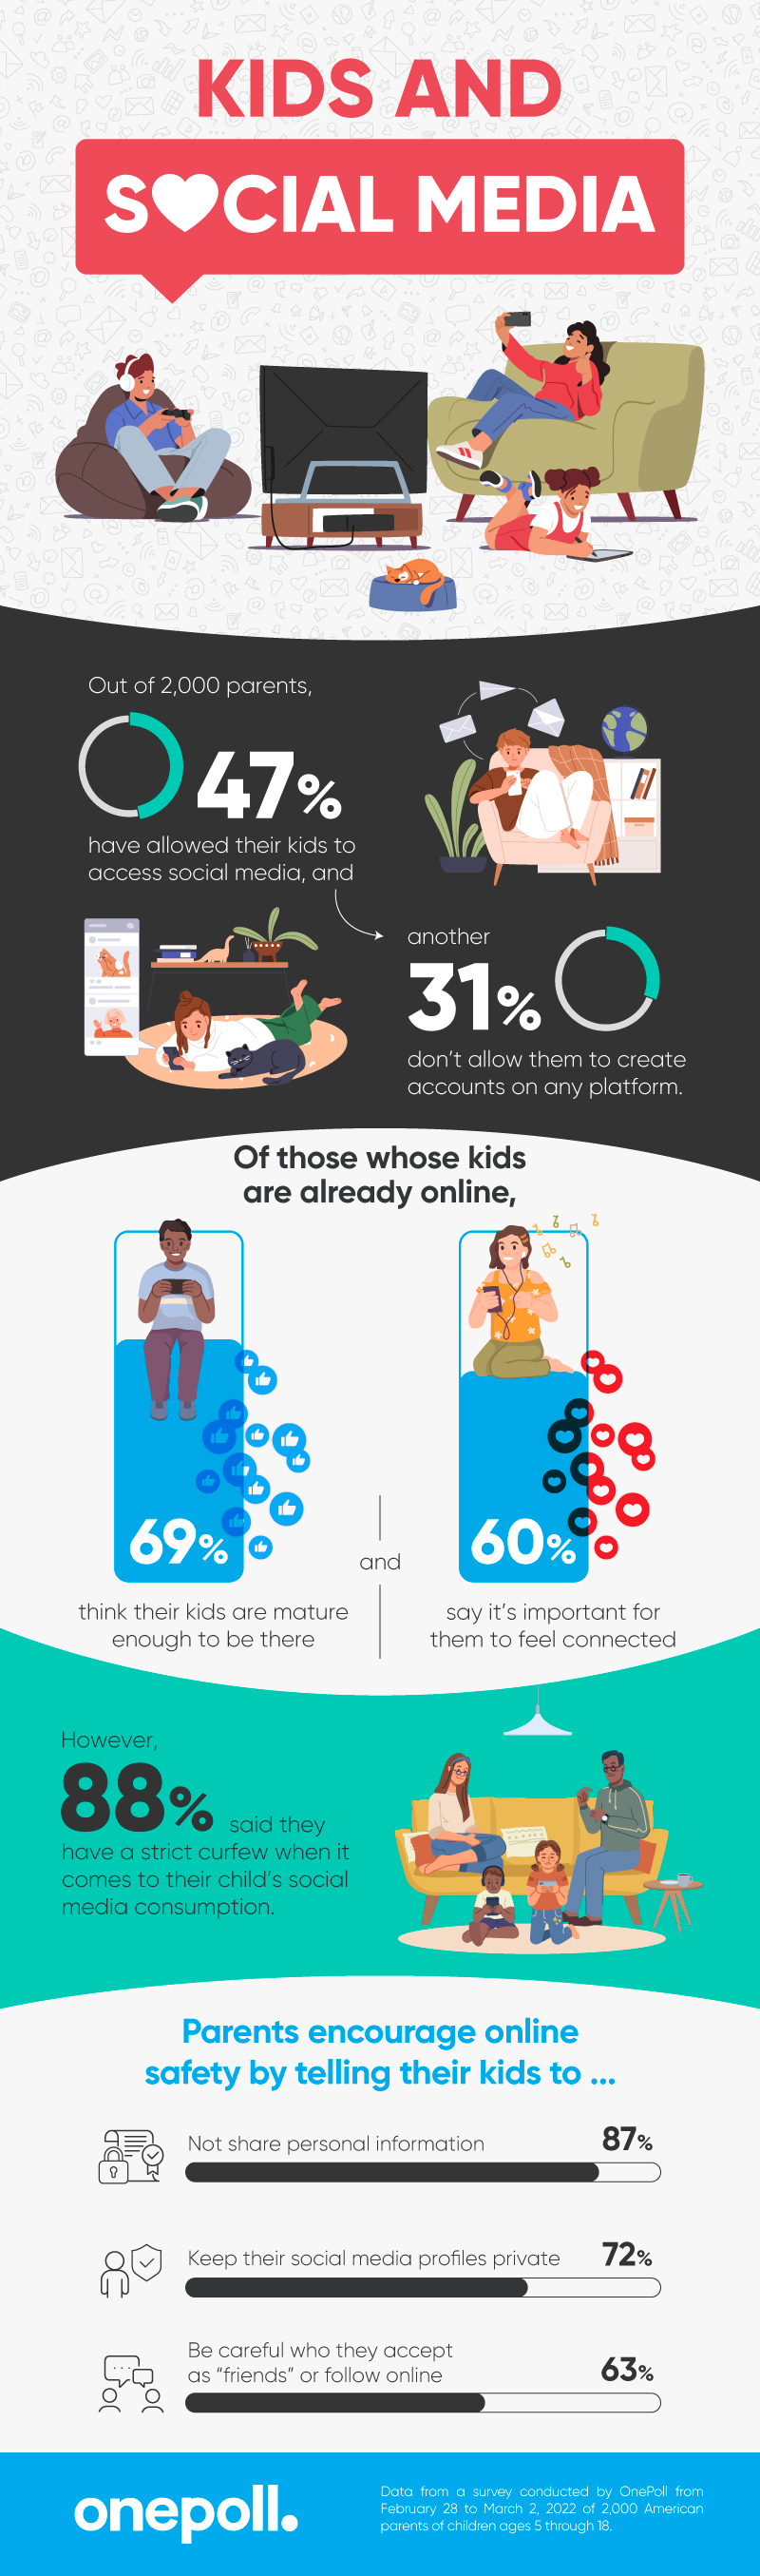 Infographic: kids and social media with summary stats and graphics showing the results of the OnePoll survey of parents